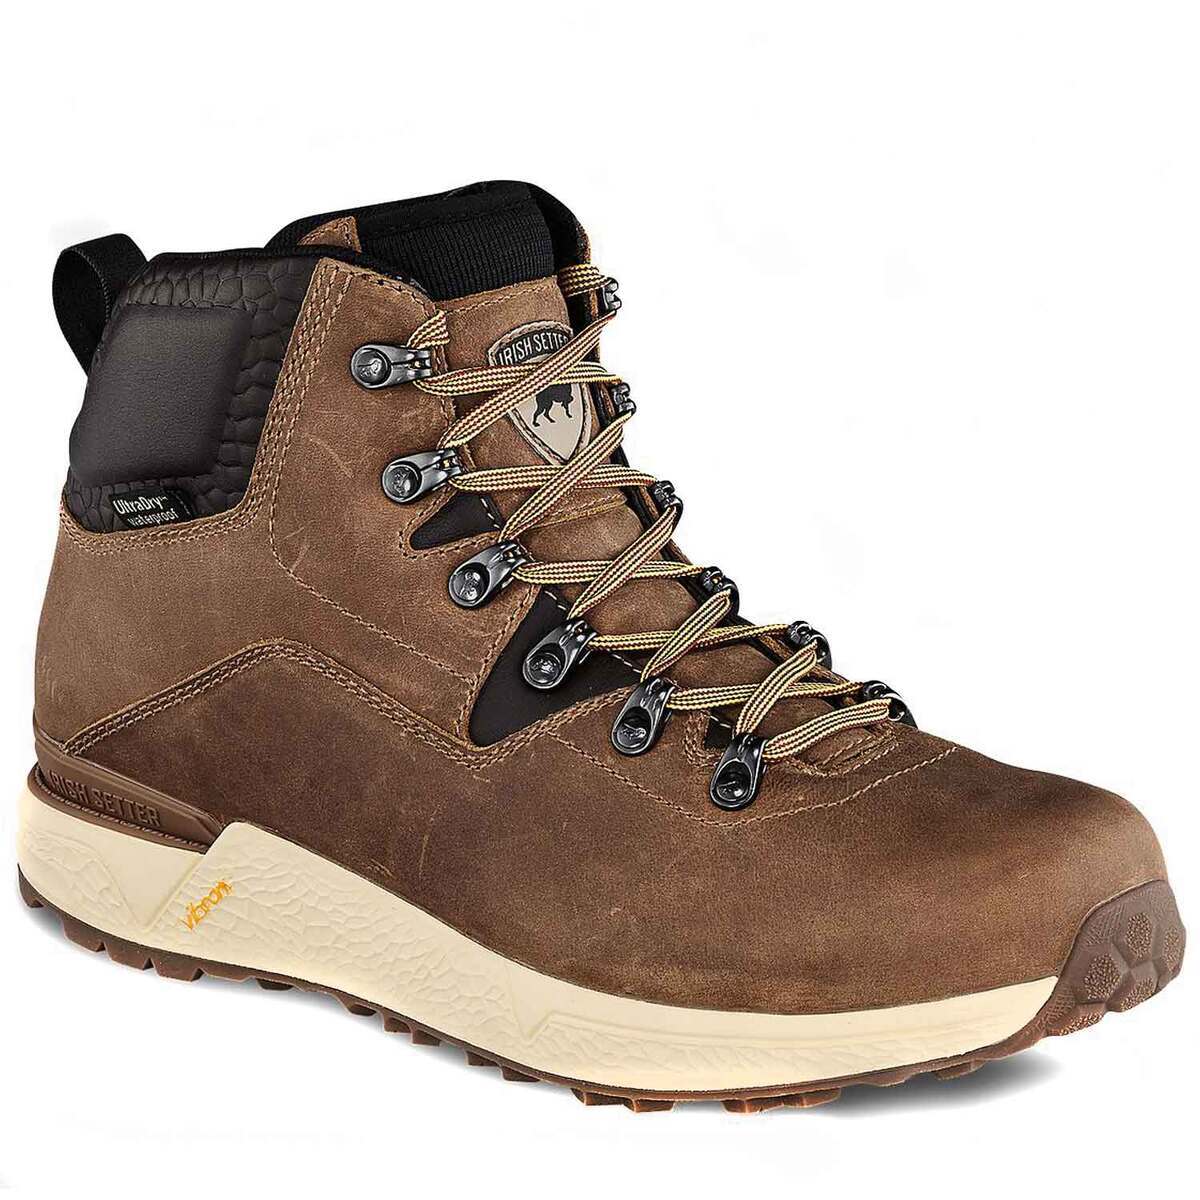 Irish Setter Purpose-Built Work Boots And Hunting Boots For, 40% OFF